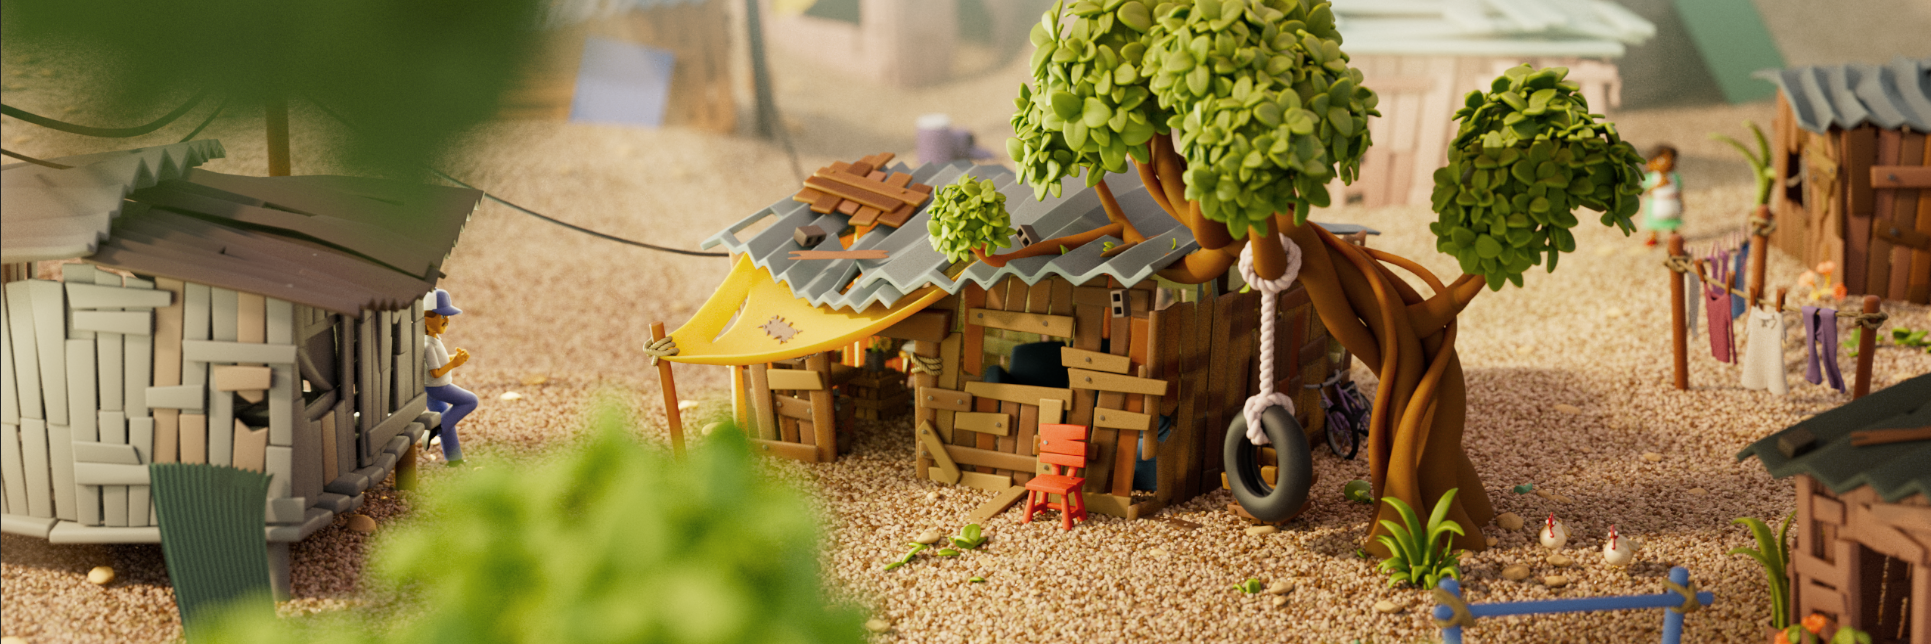 Still image of village scene from TECHO and Unsaid Studio’s 3D animated short film The Girl with the Dancing Heart